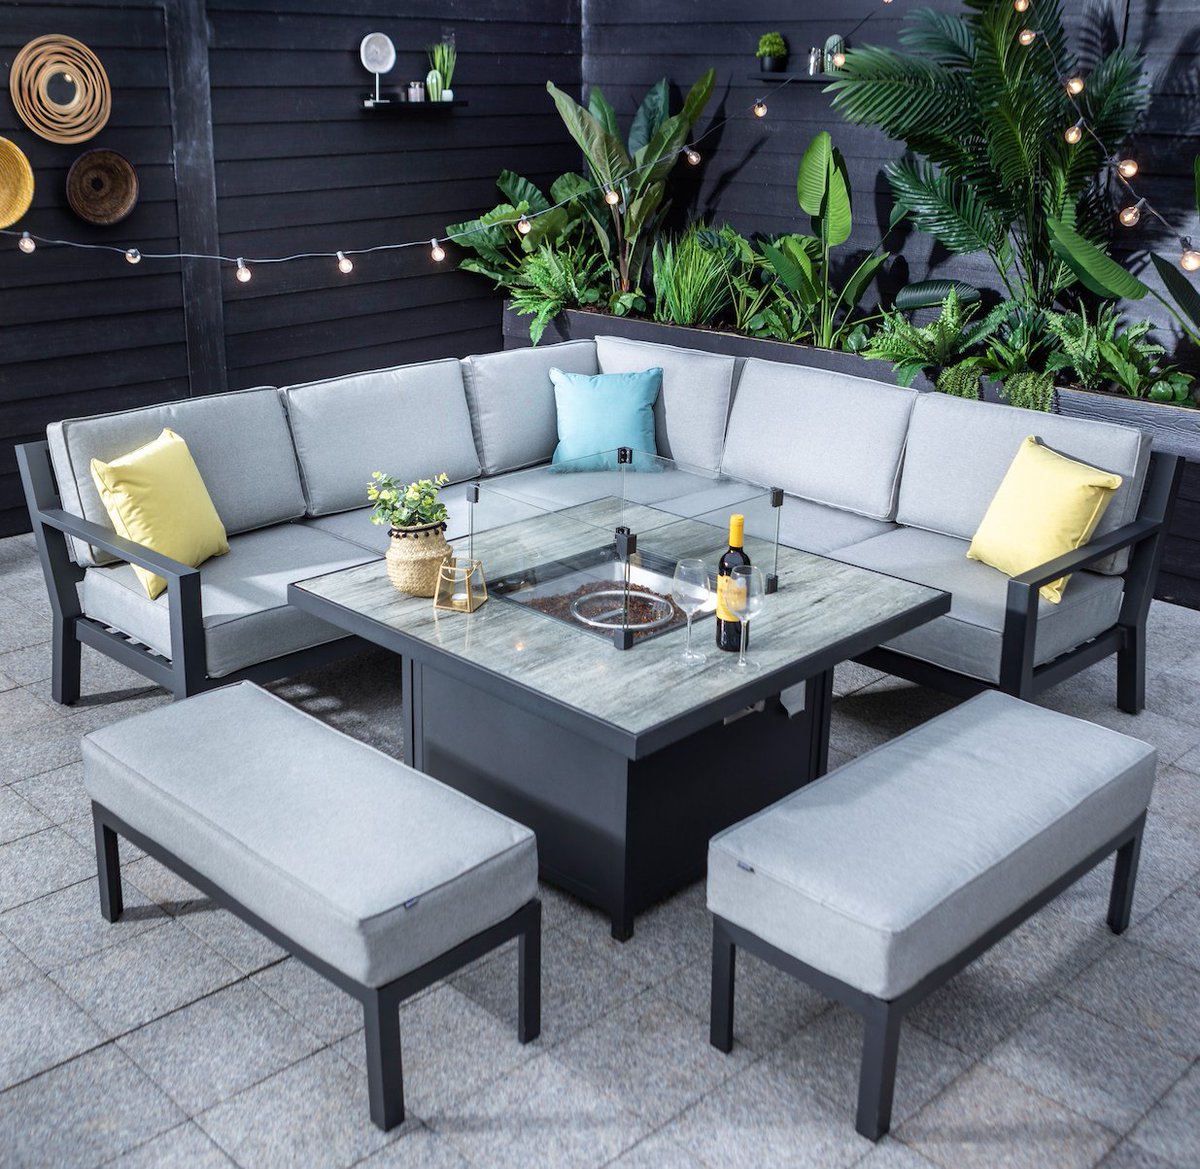 Looking for a way to keep warm outside during your evening soirees? Our Fire Pit Tables offer a modern design to complement any outdoor space with a practical central fire pit to keep you and your guests warm and cosy late into the evening. 🔥🥂 ow.ly/61F250FYqPO